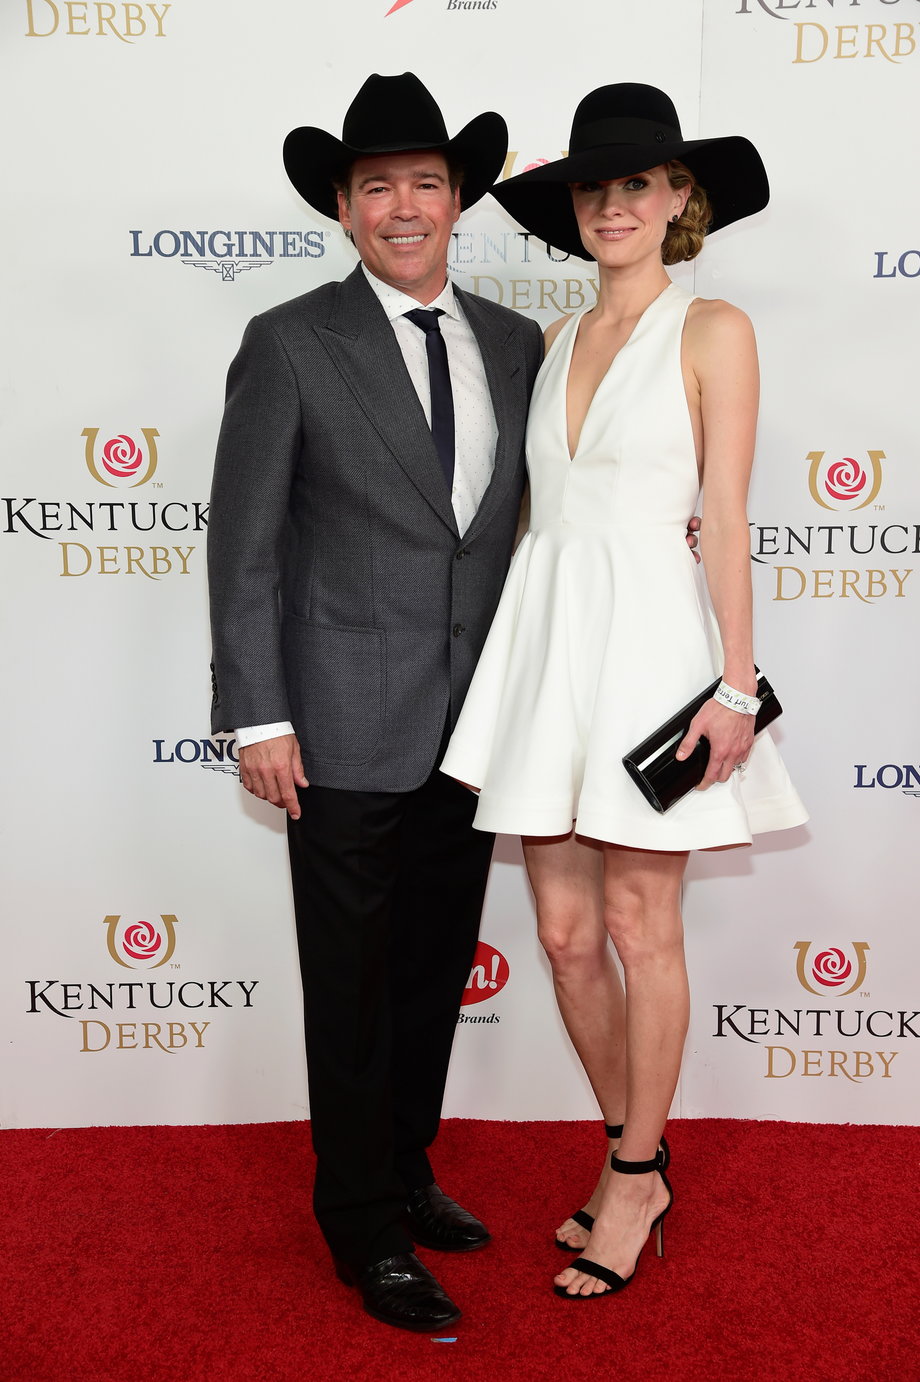 BEST: County music star Clay Walker and wife and model Jessica Craig donned simple hats and stylish outfits.